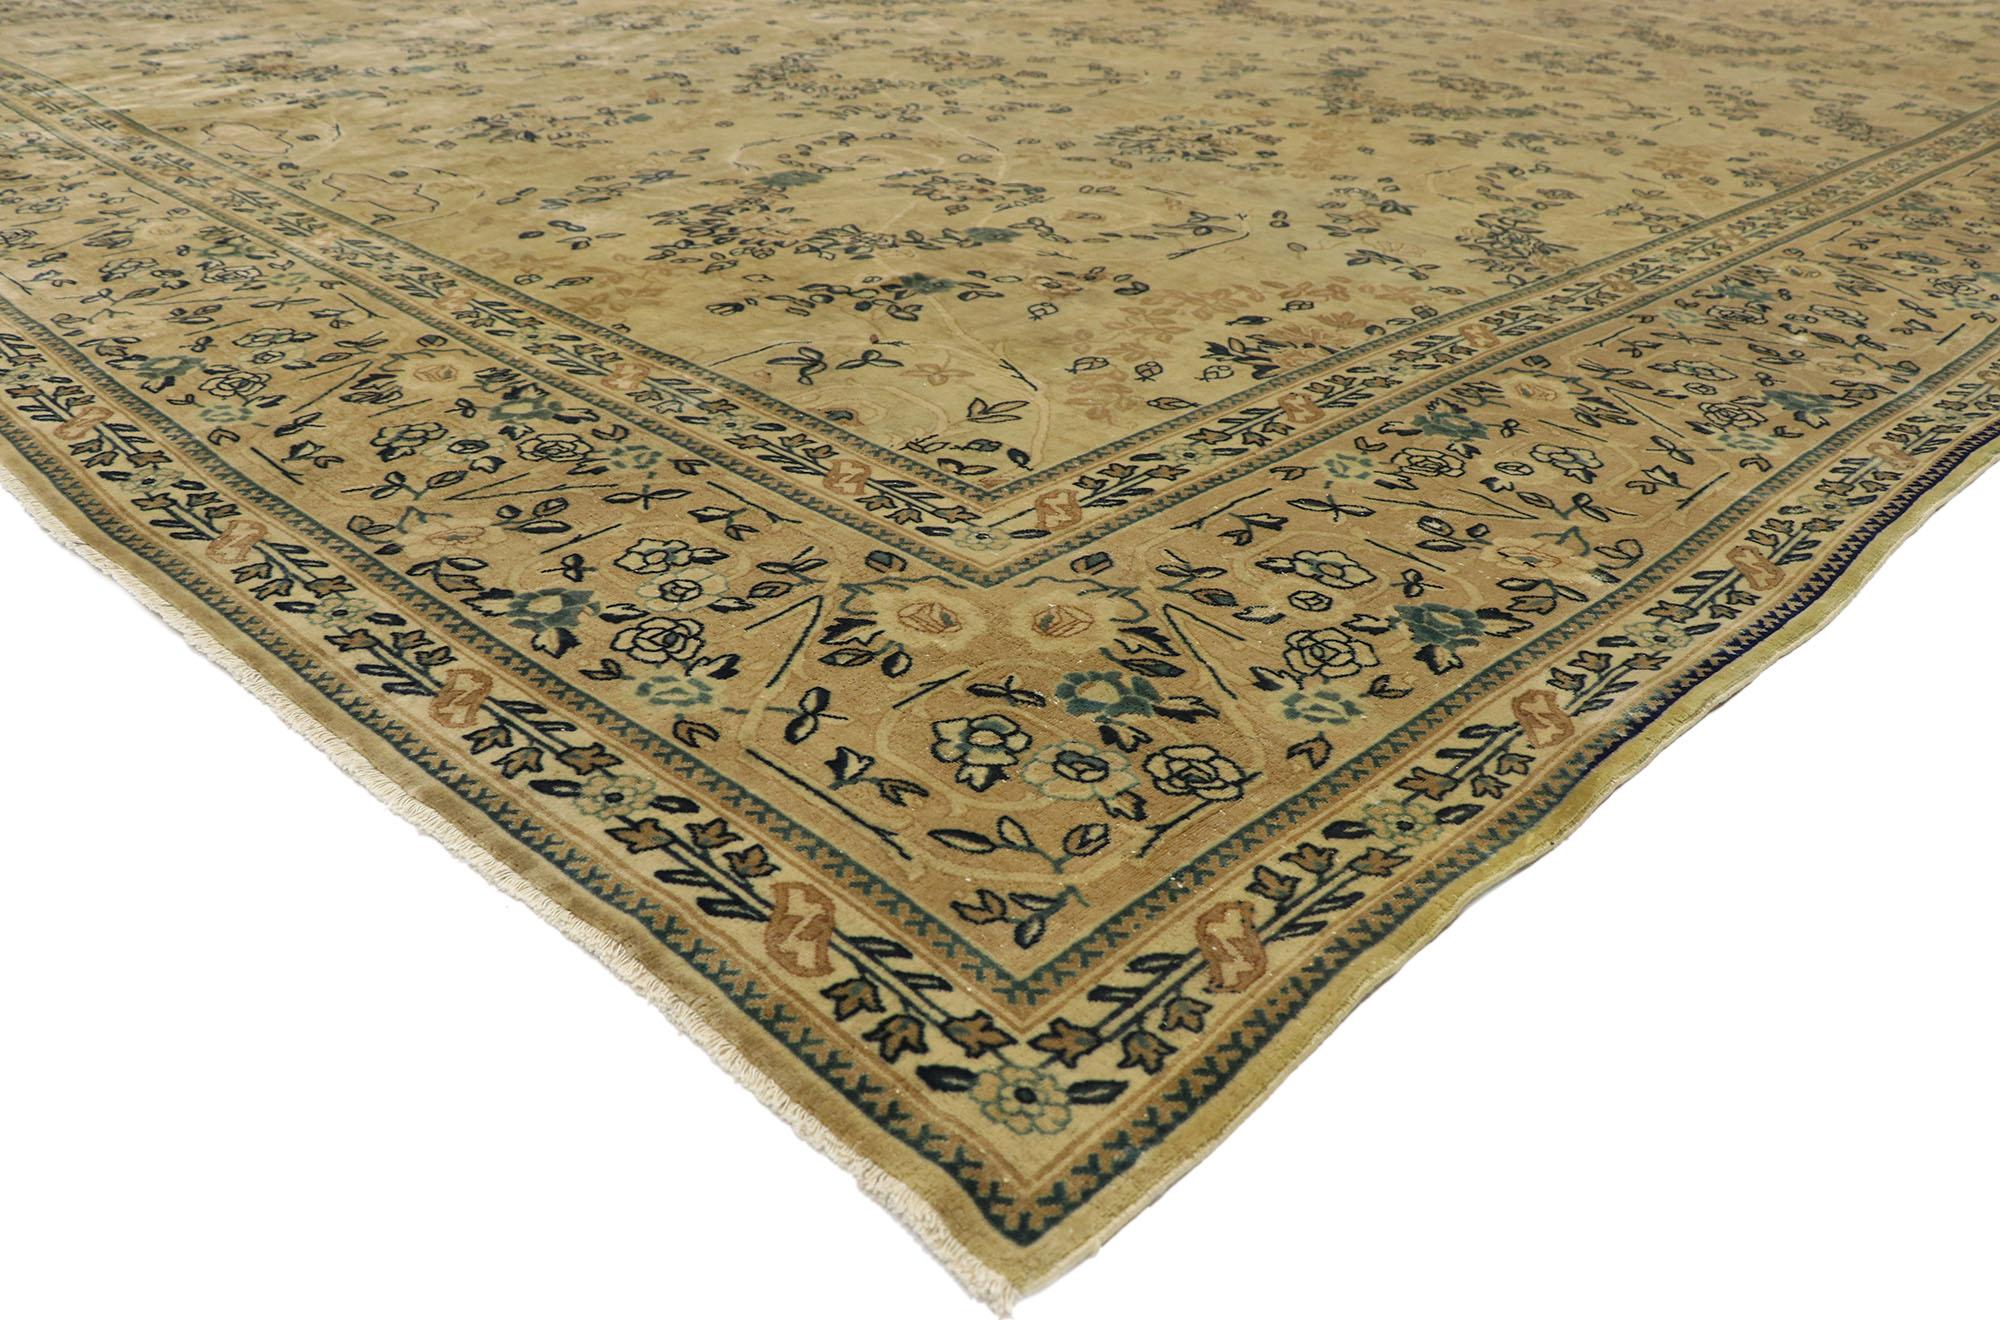 77431 Antique-Worn Indian Mogul Rug, 12'07 x 18'10. Late 19th-century Mogul Indian rugs were crafted during the declining years of the Mughal Empire, exhibiting intricate designs influenced by Persian, Indian, and European art. These rugs were made